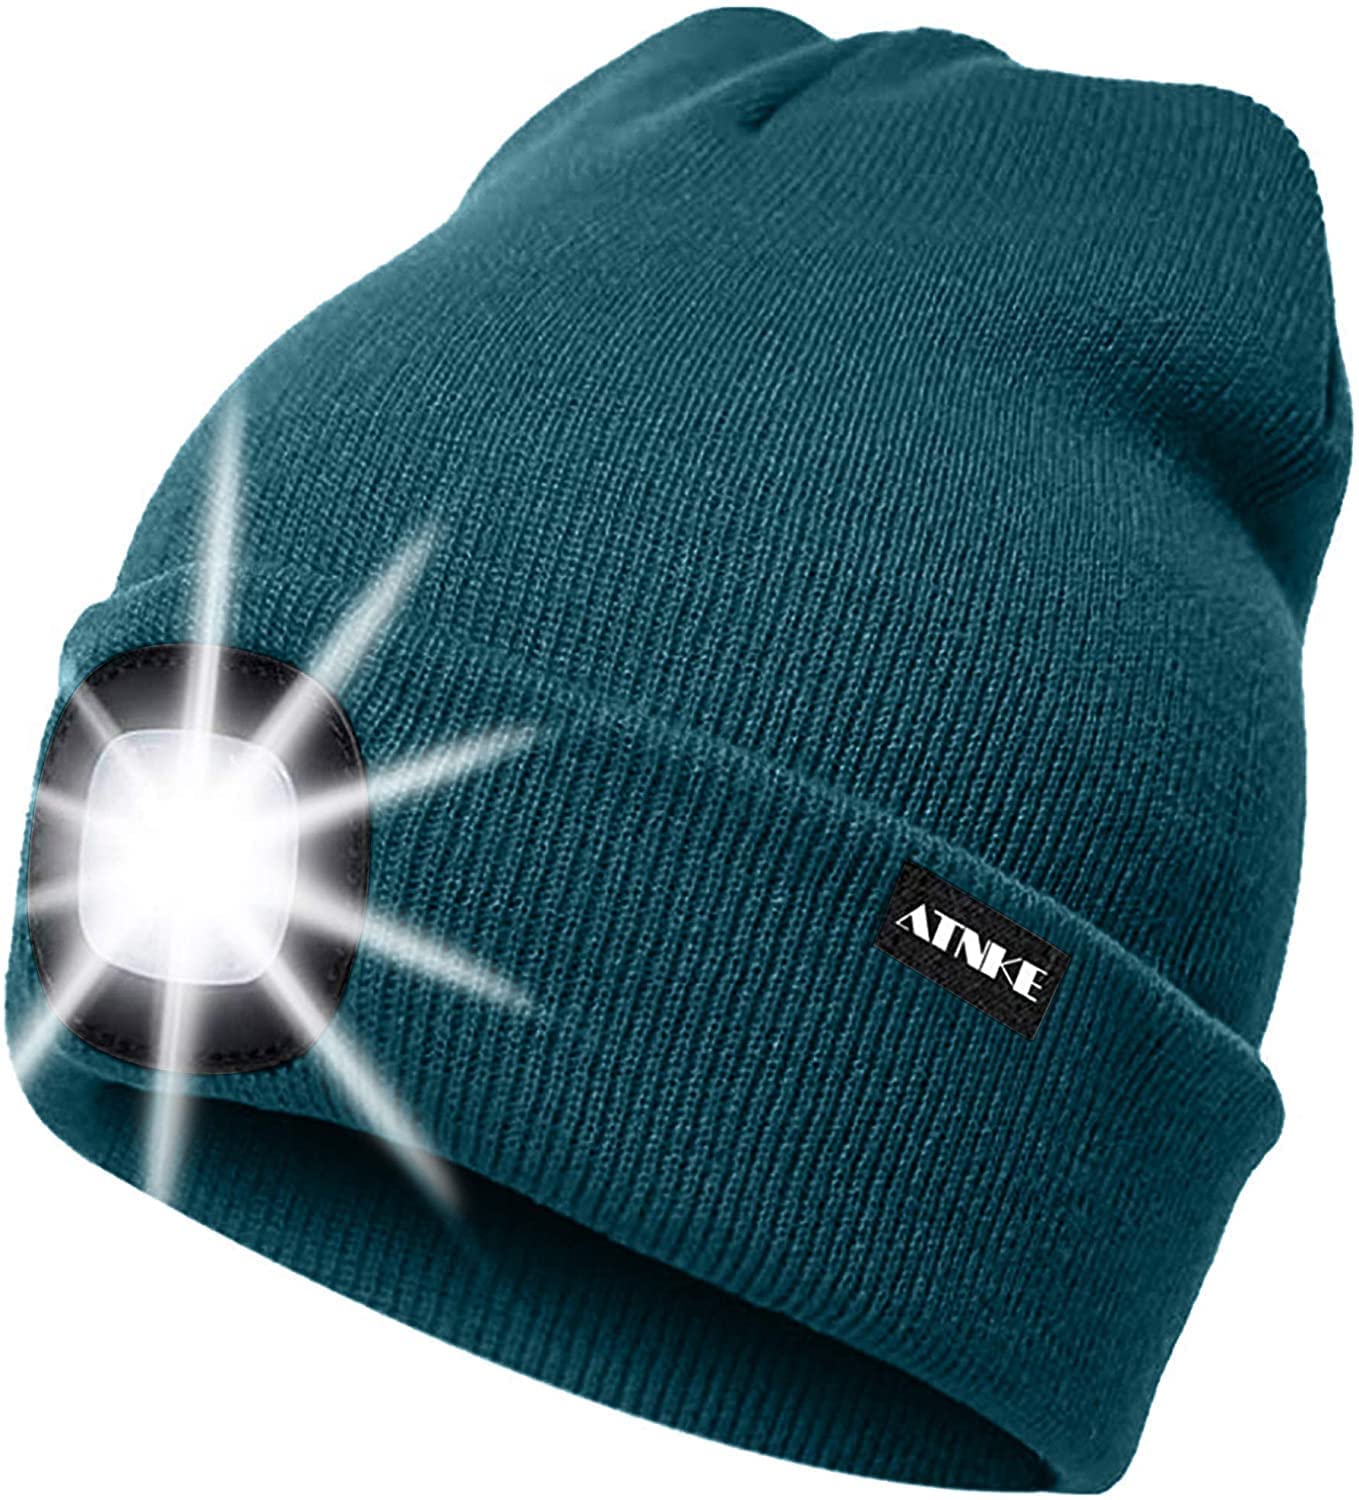 Unisex LED Beanie Hat with Light,USB Rechargeable Running Hat Ultra Bright  LED Waterproof Light Lamp anLED Flashing Alarm Headlamp Multi-Color 